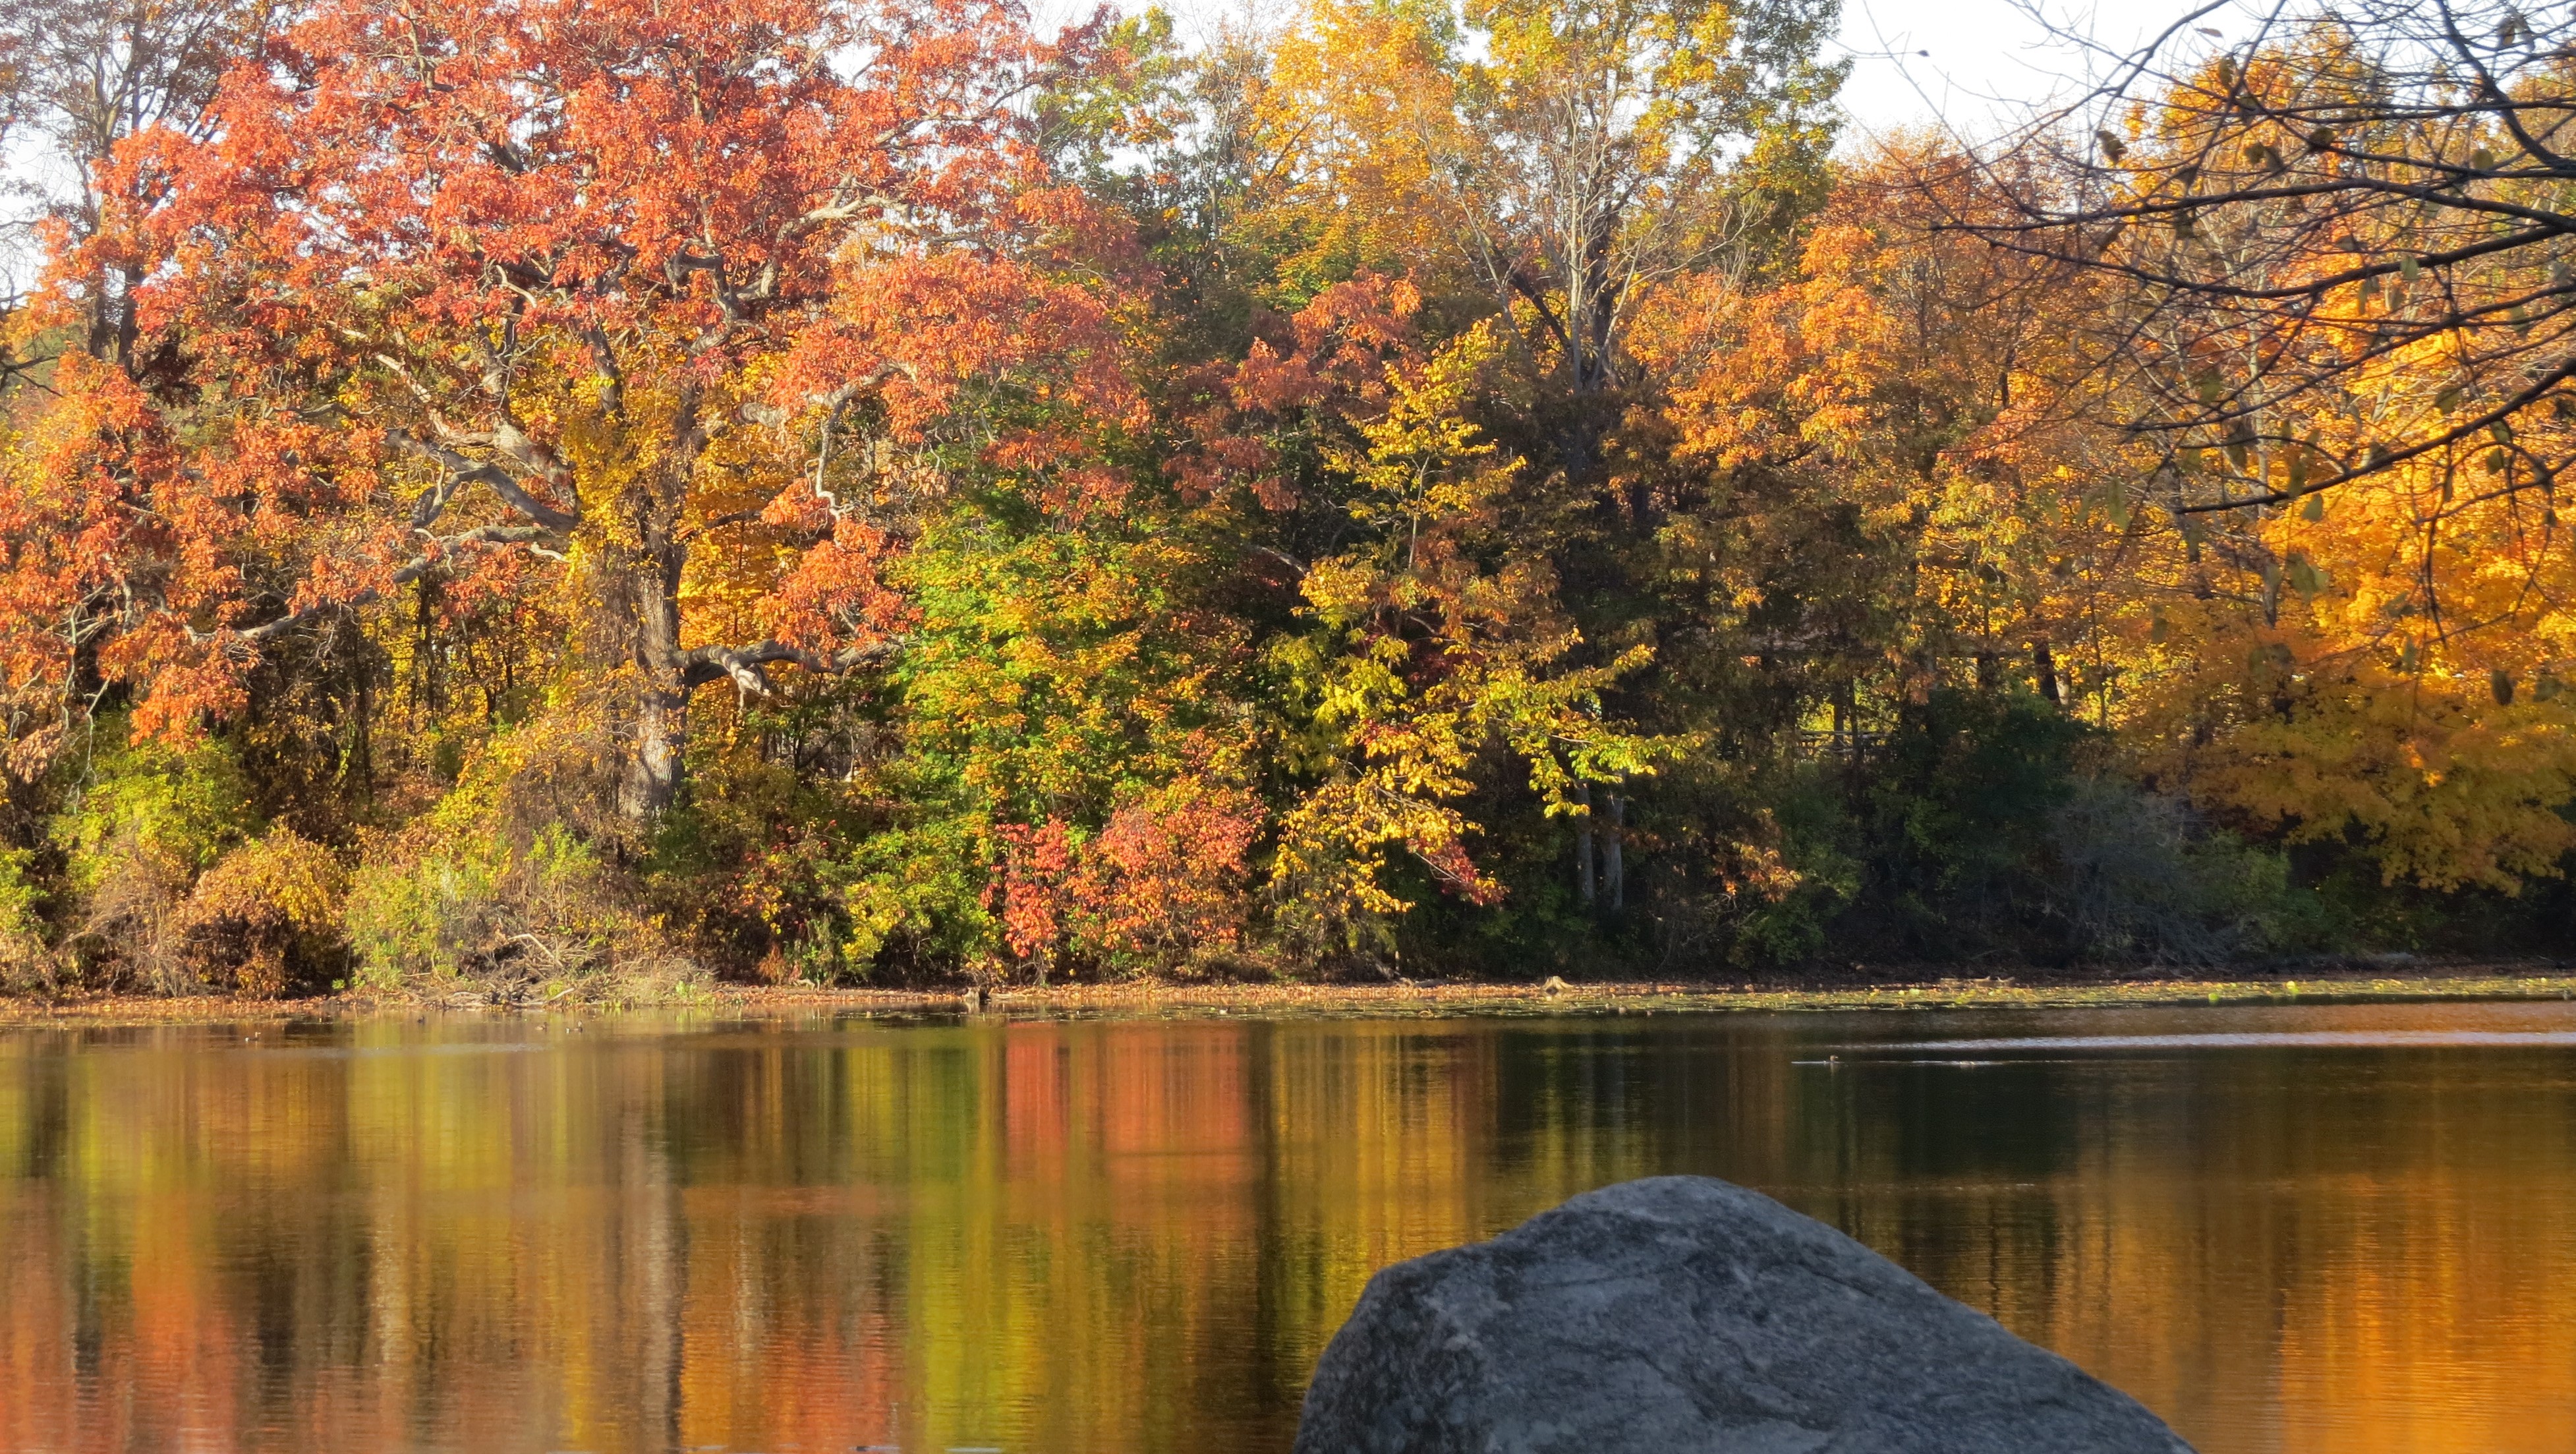 A view of tall trees in fall colors from across a body of water. Deep oranges, yellows, and green reflect brilliantly on top of the water.